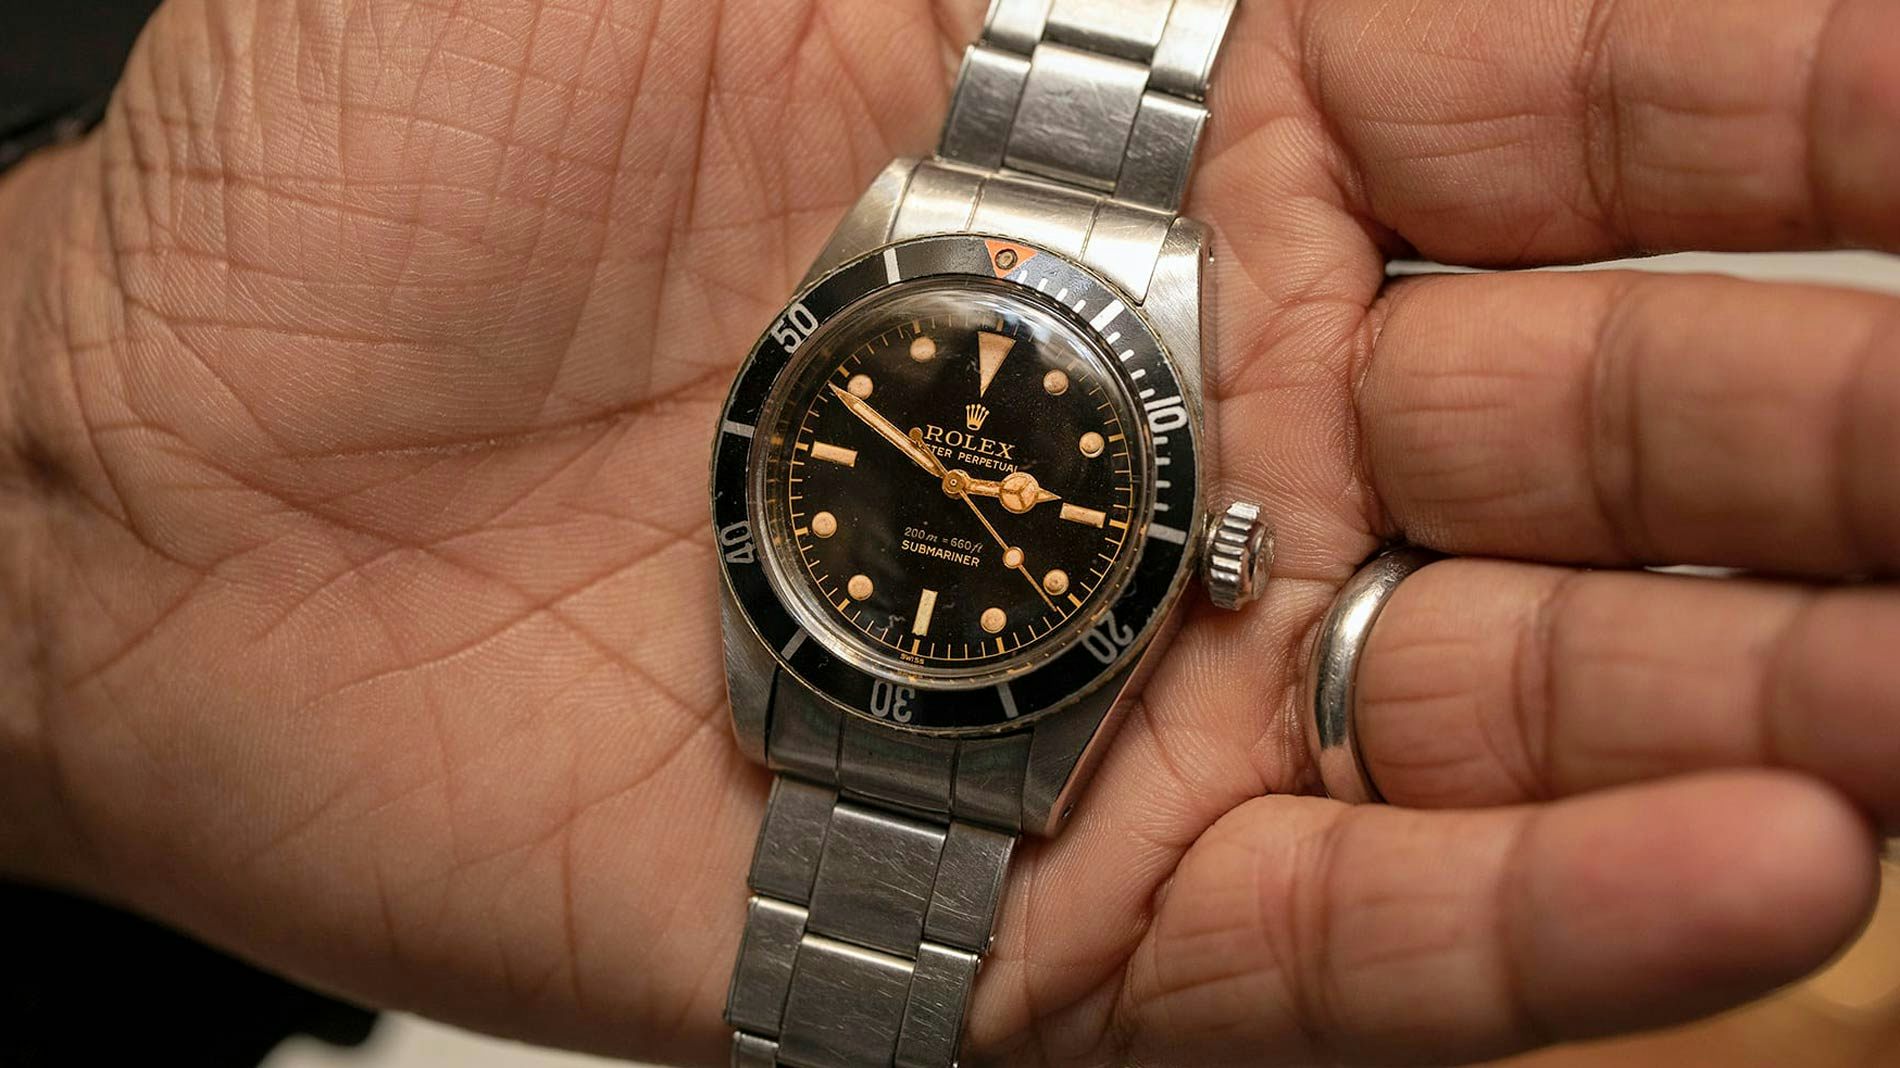 How to Buy an Authentic Vintage Watch on